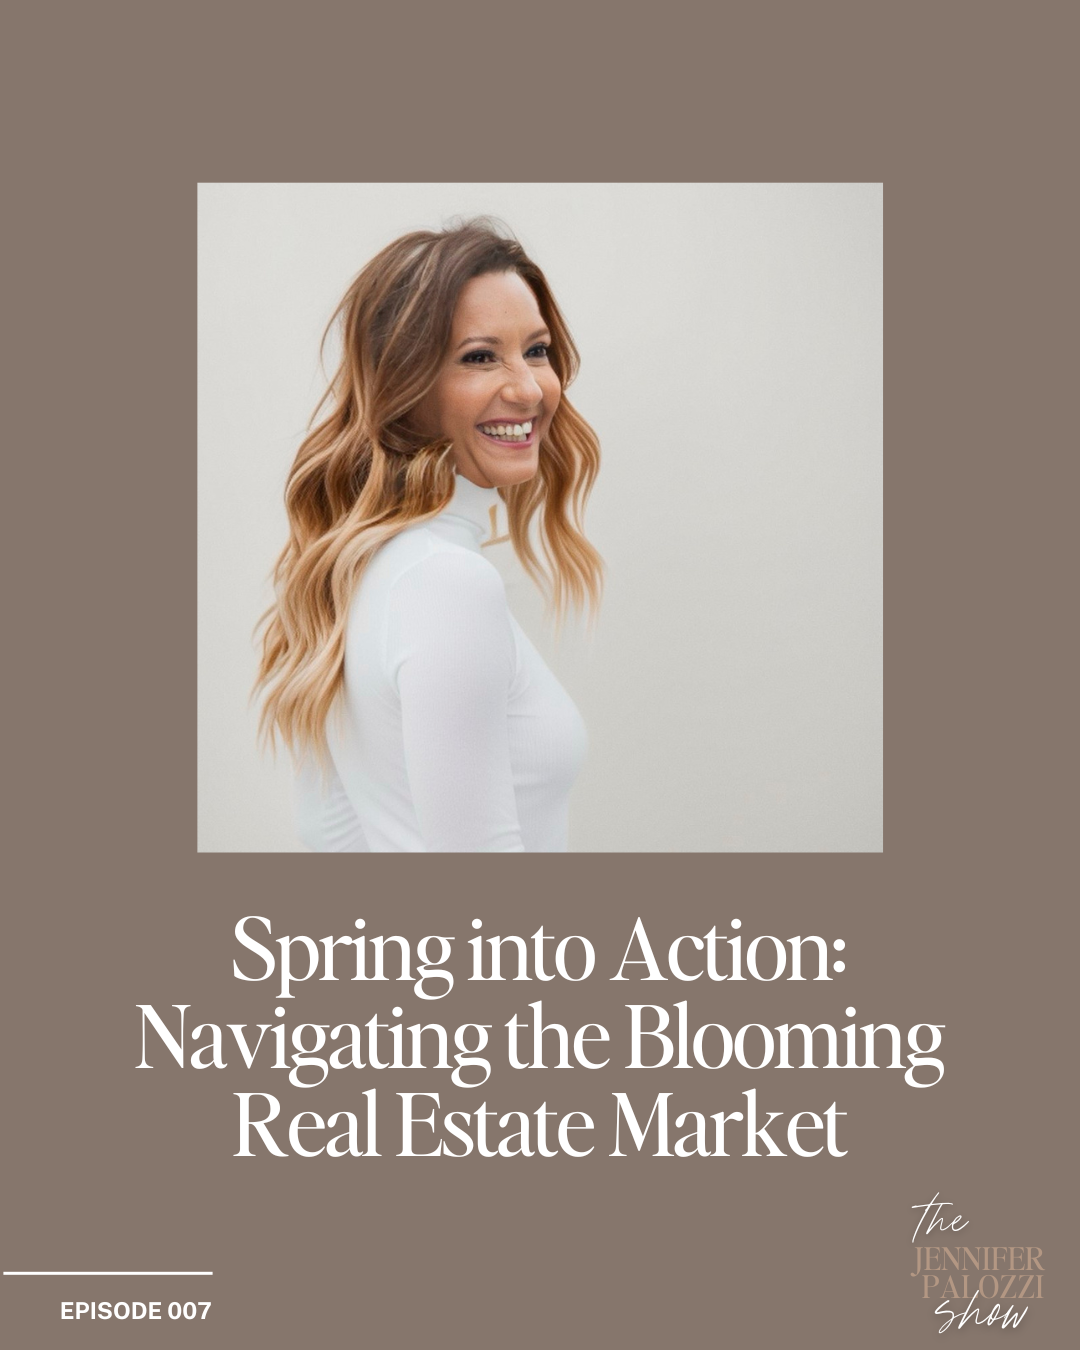 Episode 007 of the Jennifer Palozzi Show Spring into Action: Navigating the Blooming Real Estate Market